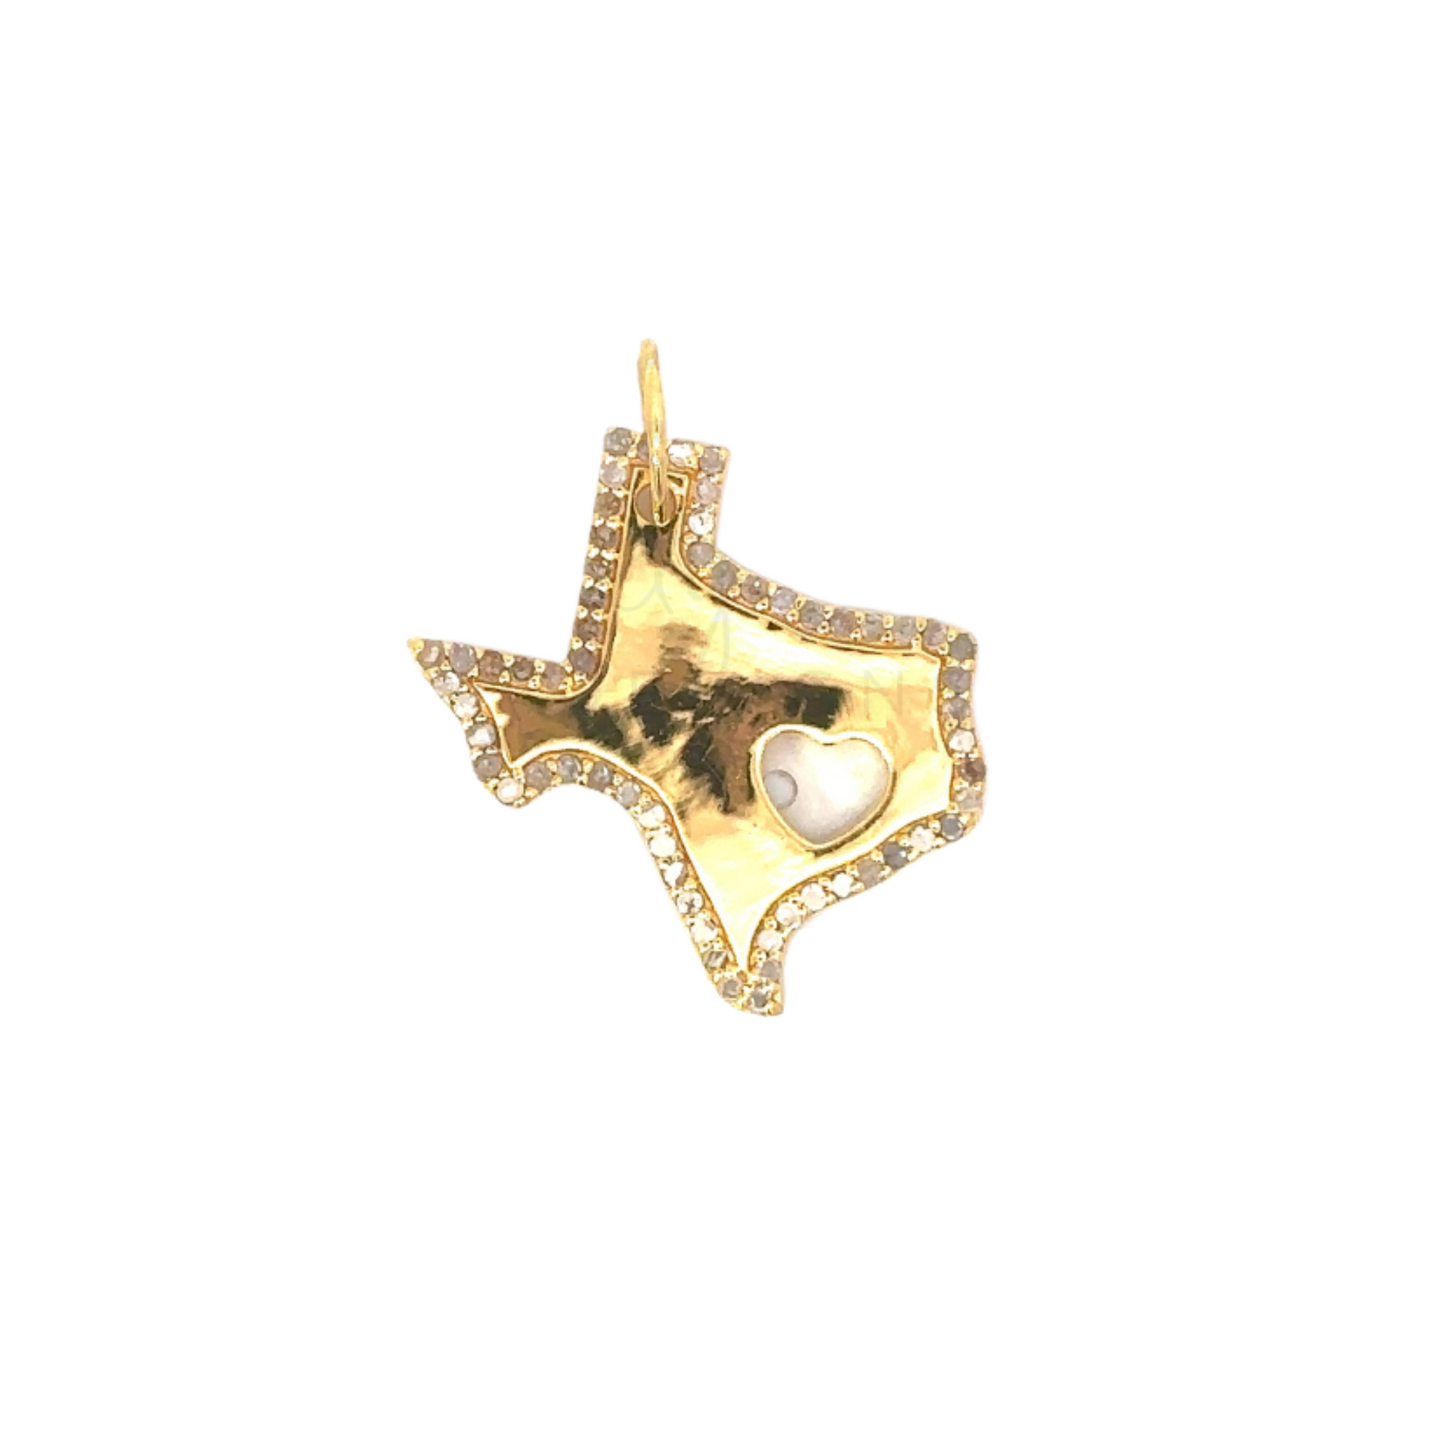 Texas Heart Cut Out Pendant with Pave Border